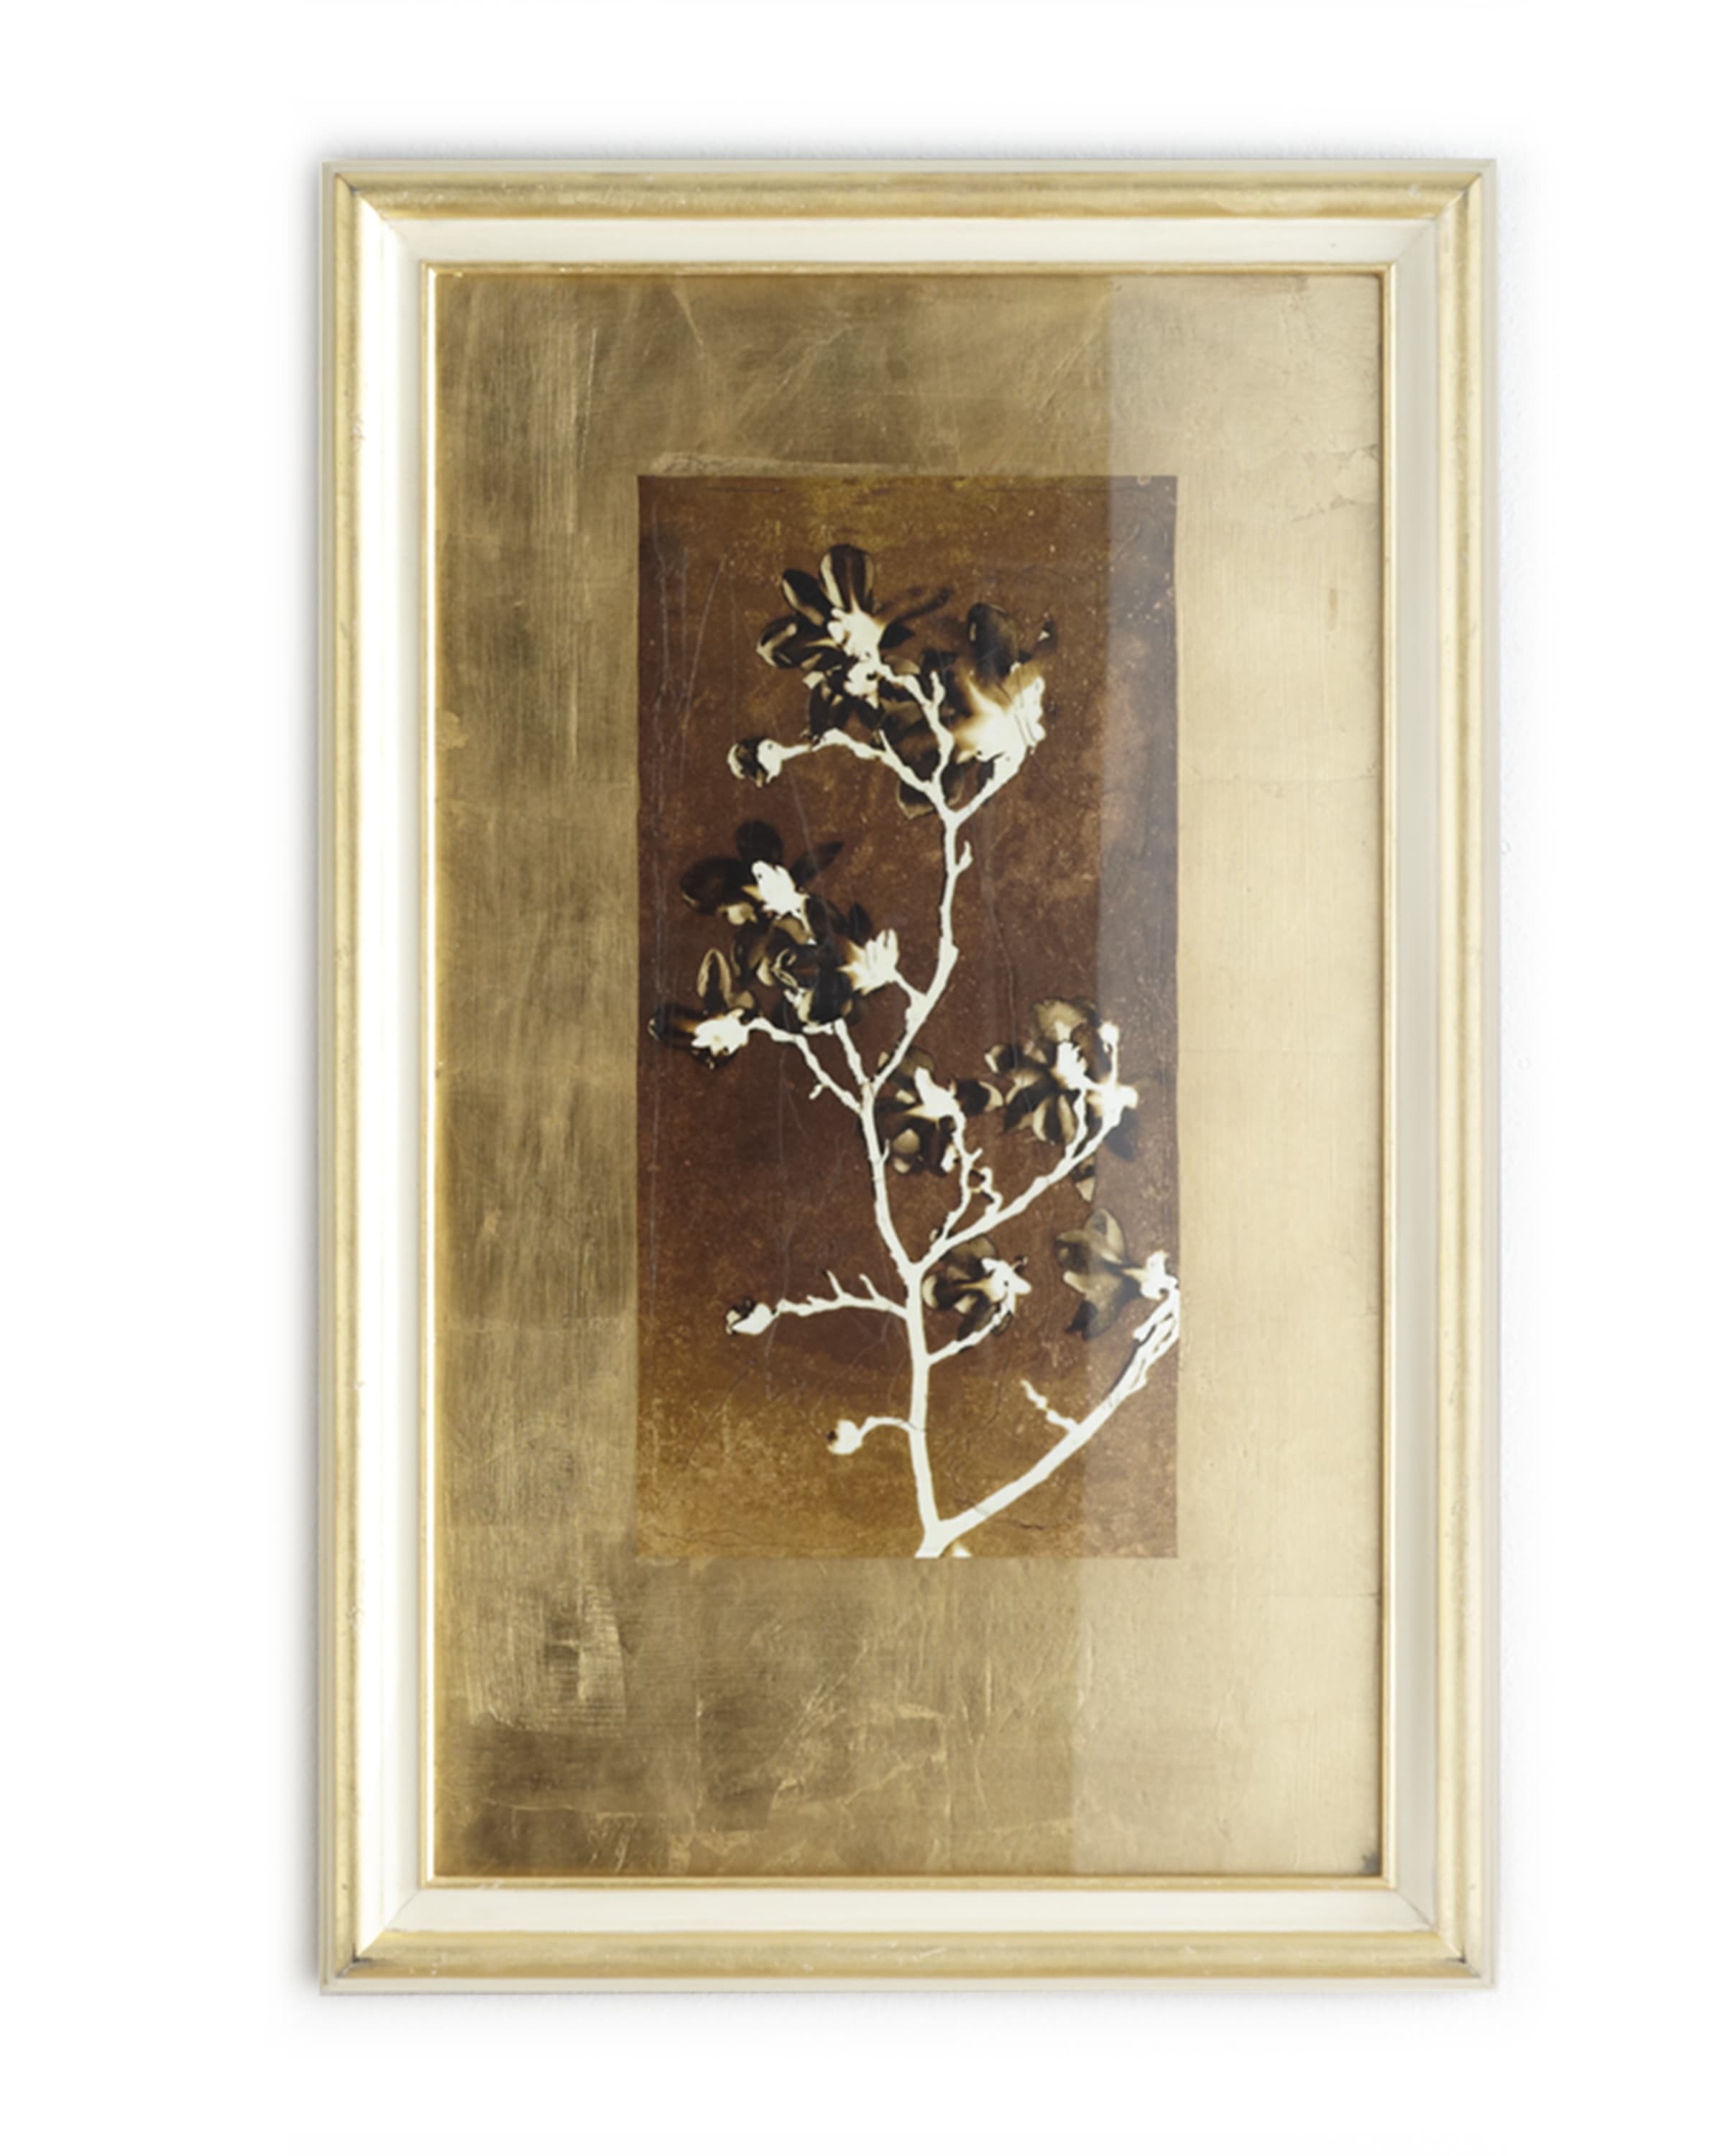 John-Richard Collection "Gold Leaf Branches II" Print